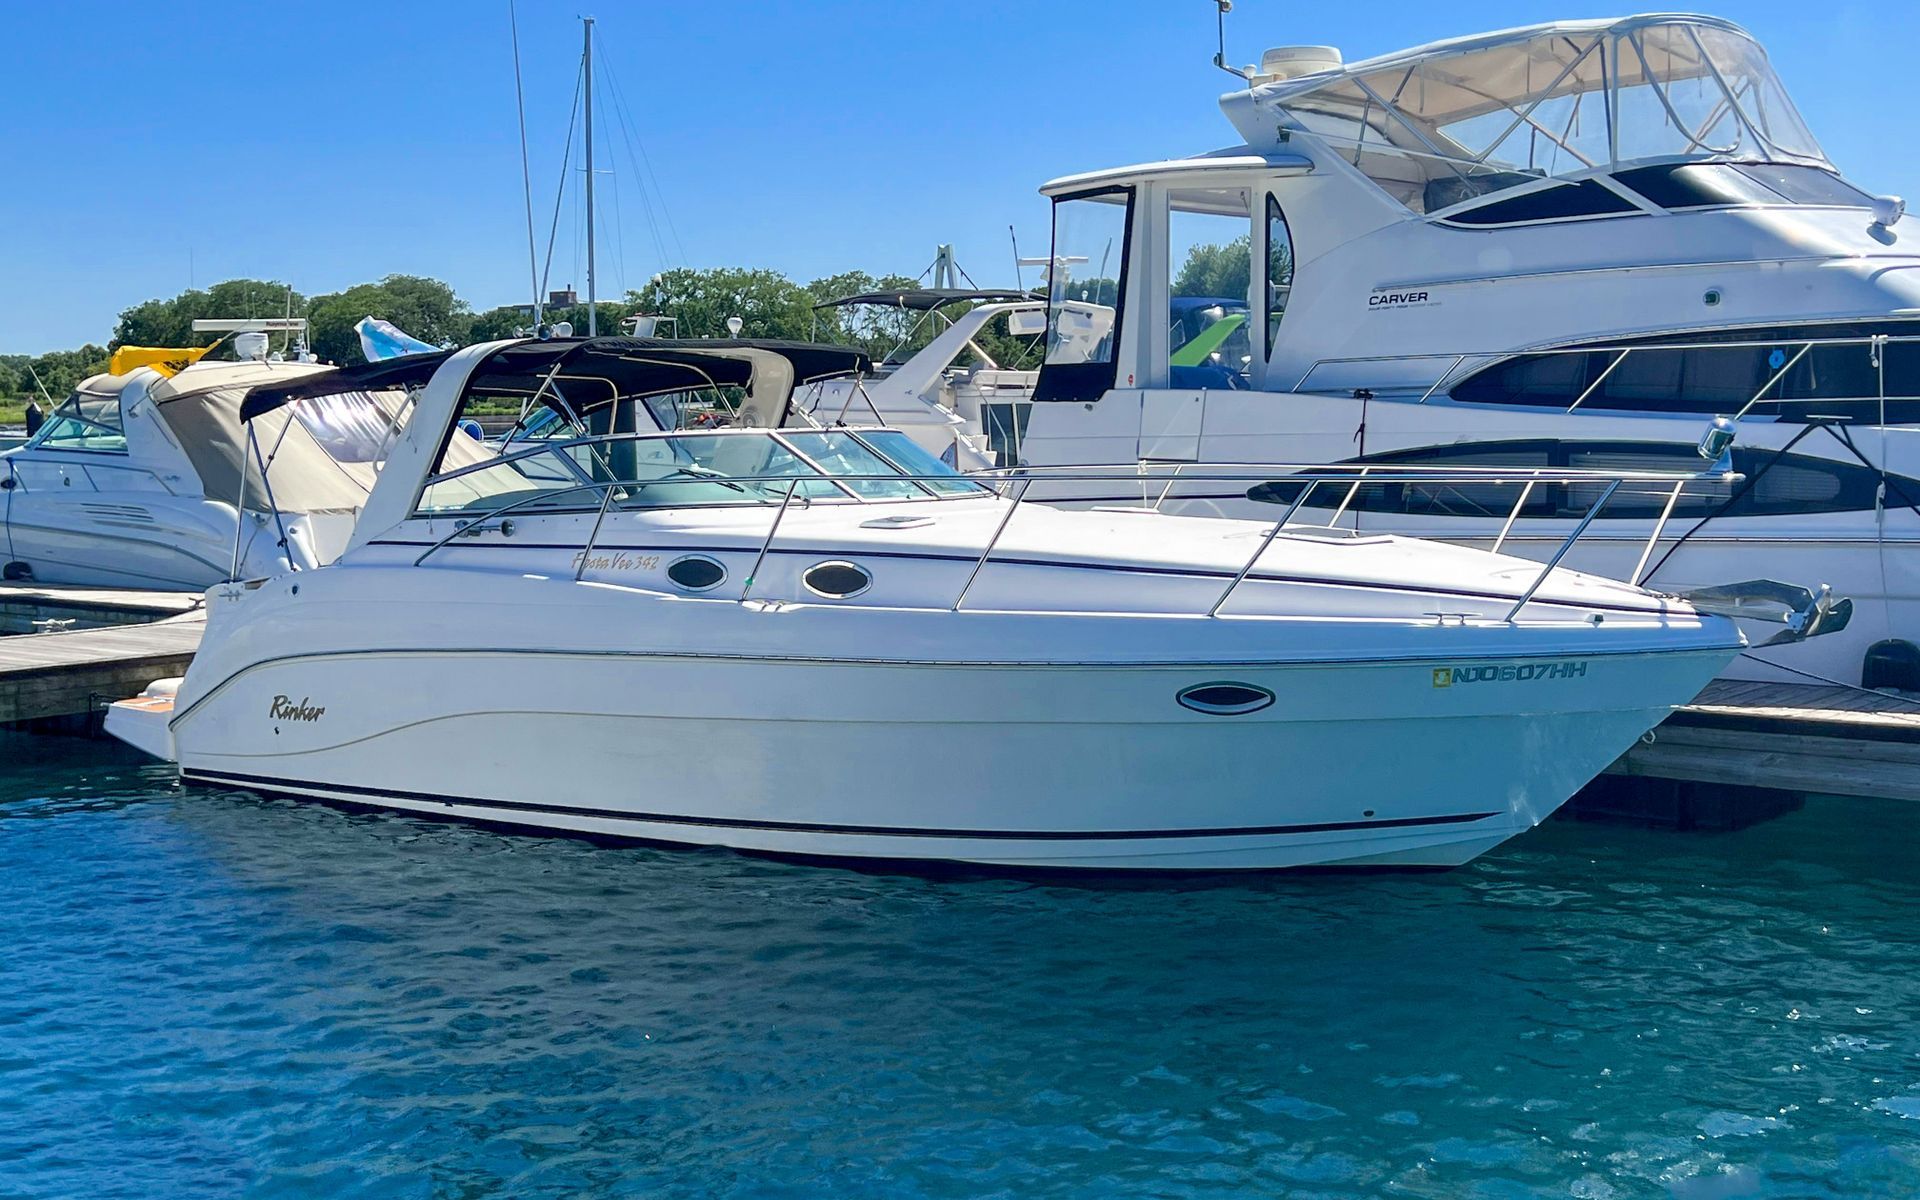 37 Rinker Fiesta Boat Rentals Chicago IL Knot My Boat Charters